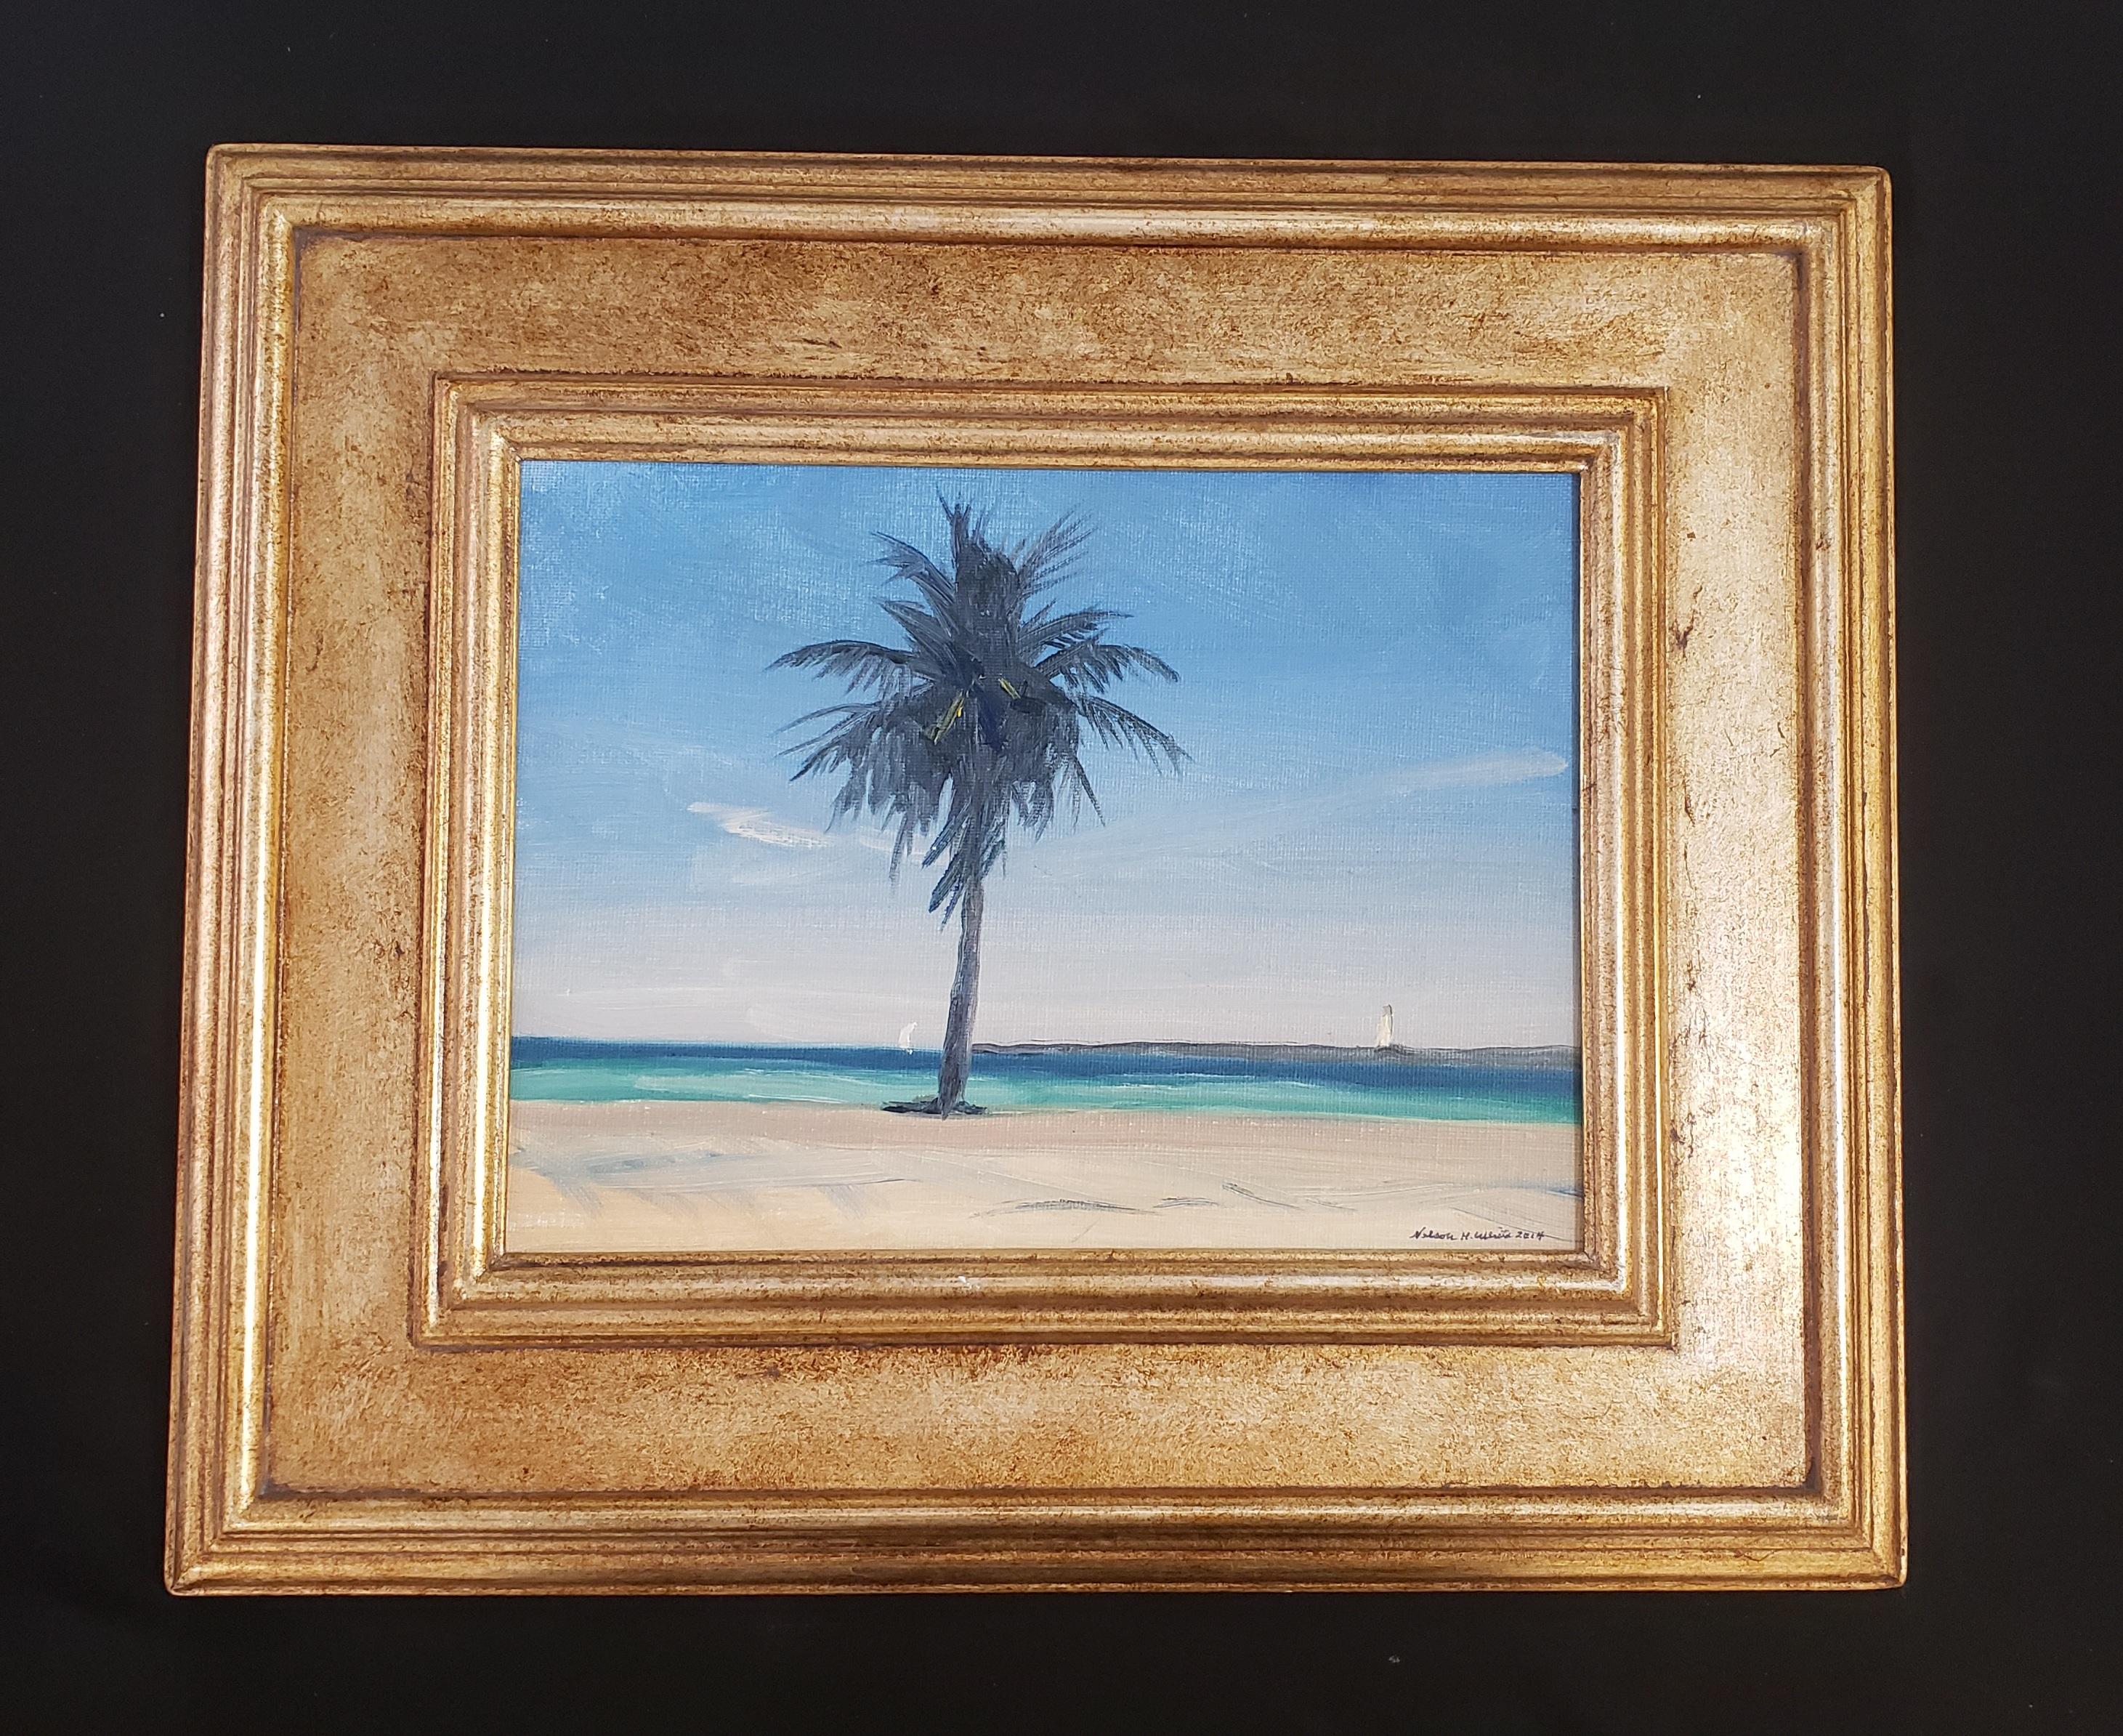   Cable Beach Palm Tree Nassau Bahamas Impressionism Museum Exhibits  - Painting by Nelson H. White